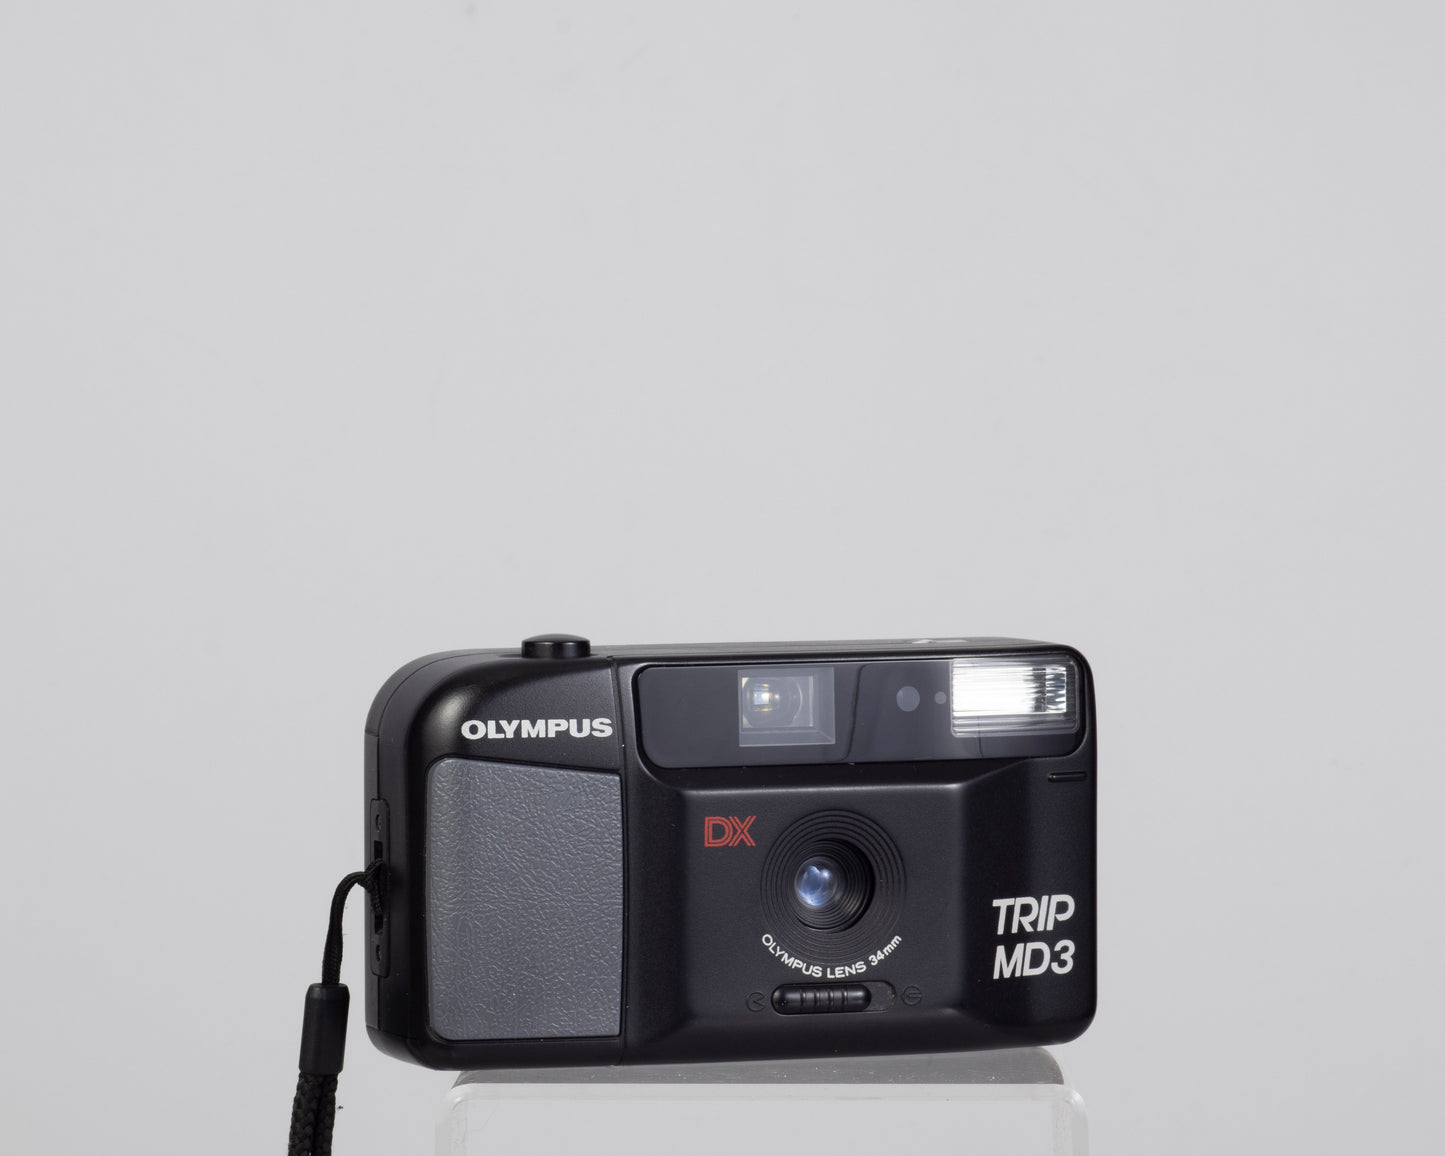 The Olympus Trip MD3 is a simple compact 35mm film camera featuring a fixed 34mm lens.